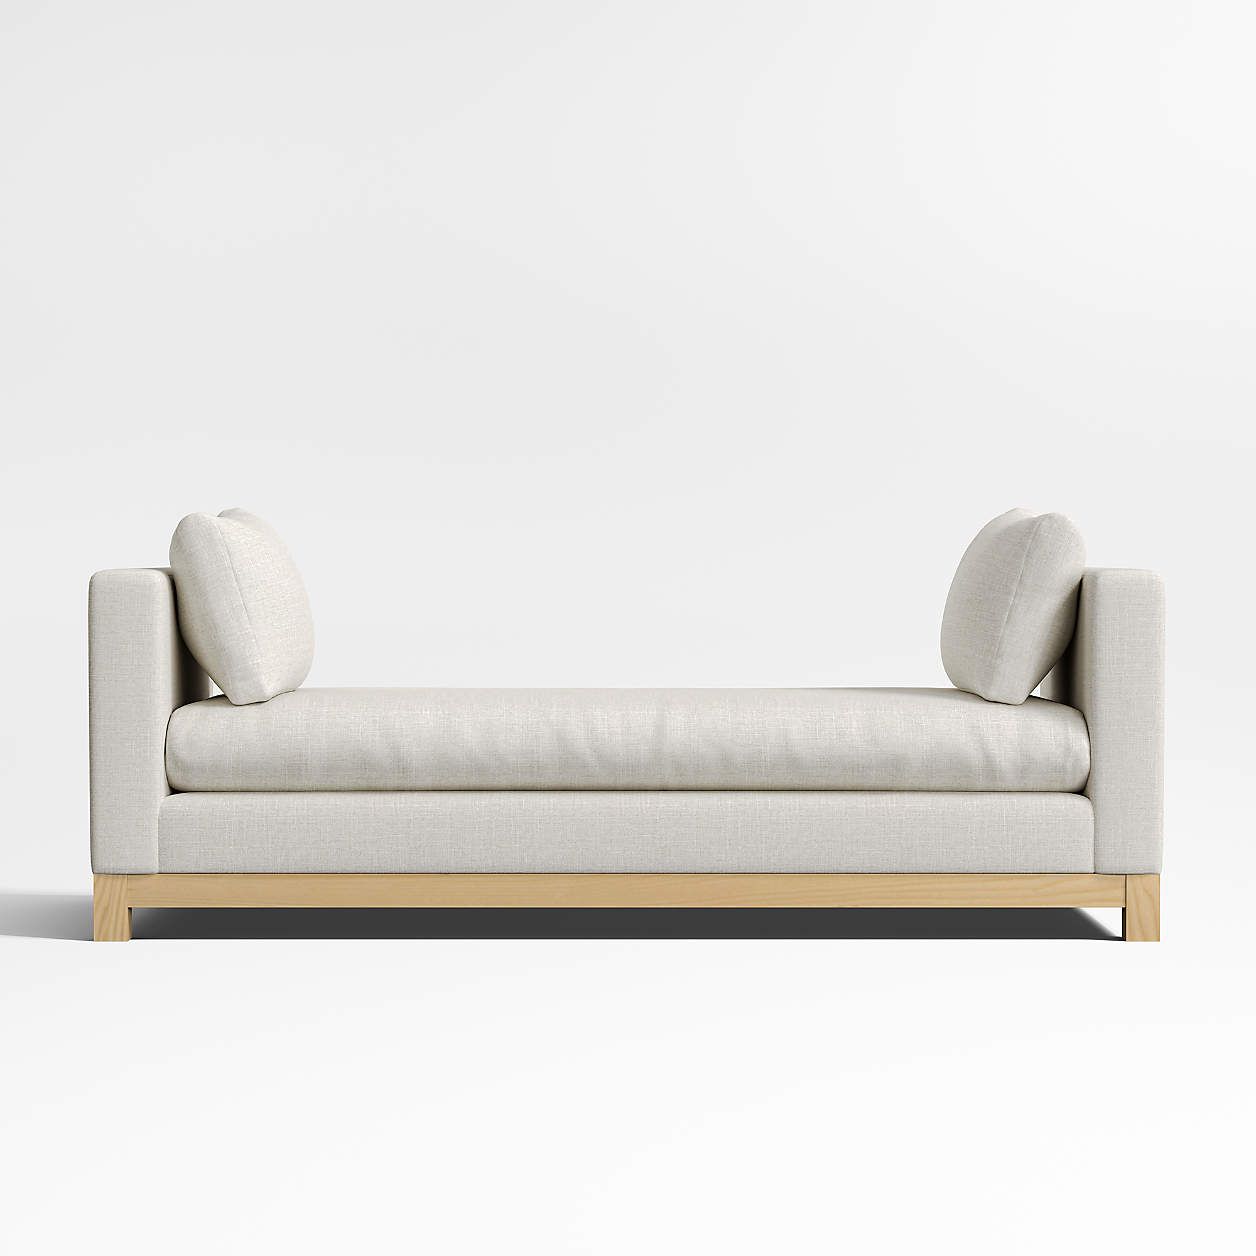 Pacific Wood Daybed | Crate & Barrel | Crate & Barrel